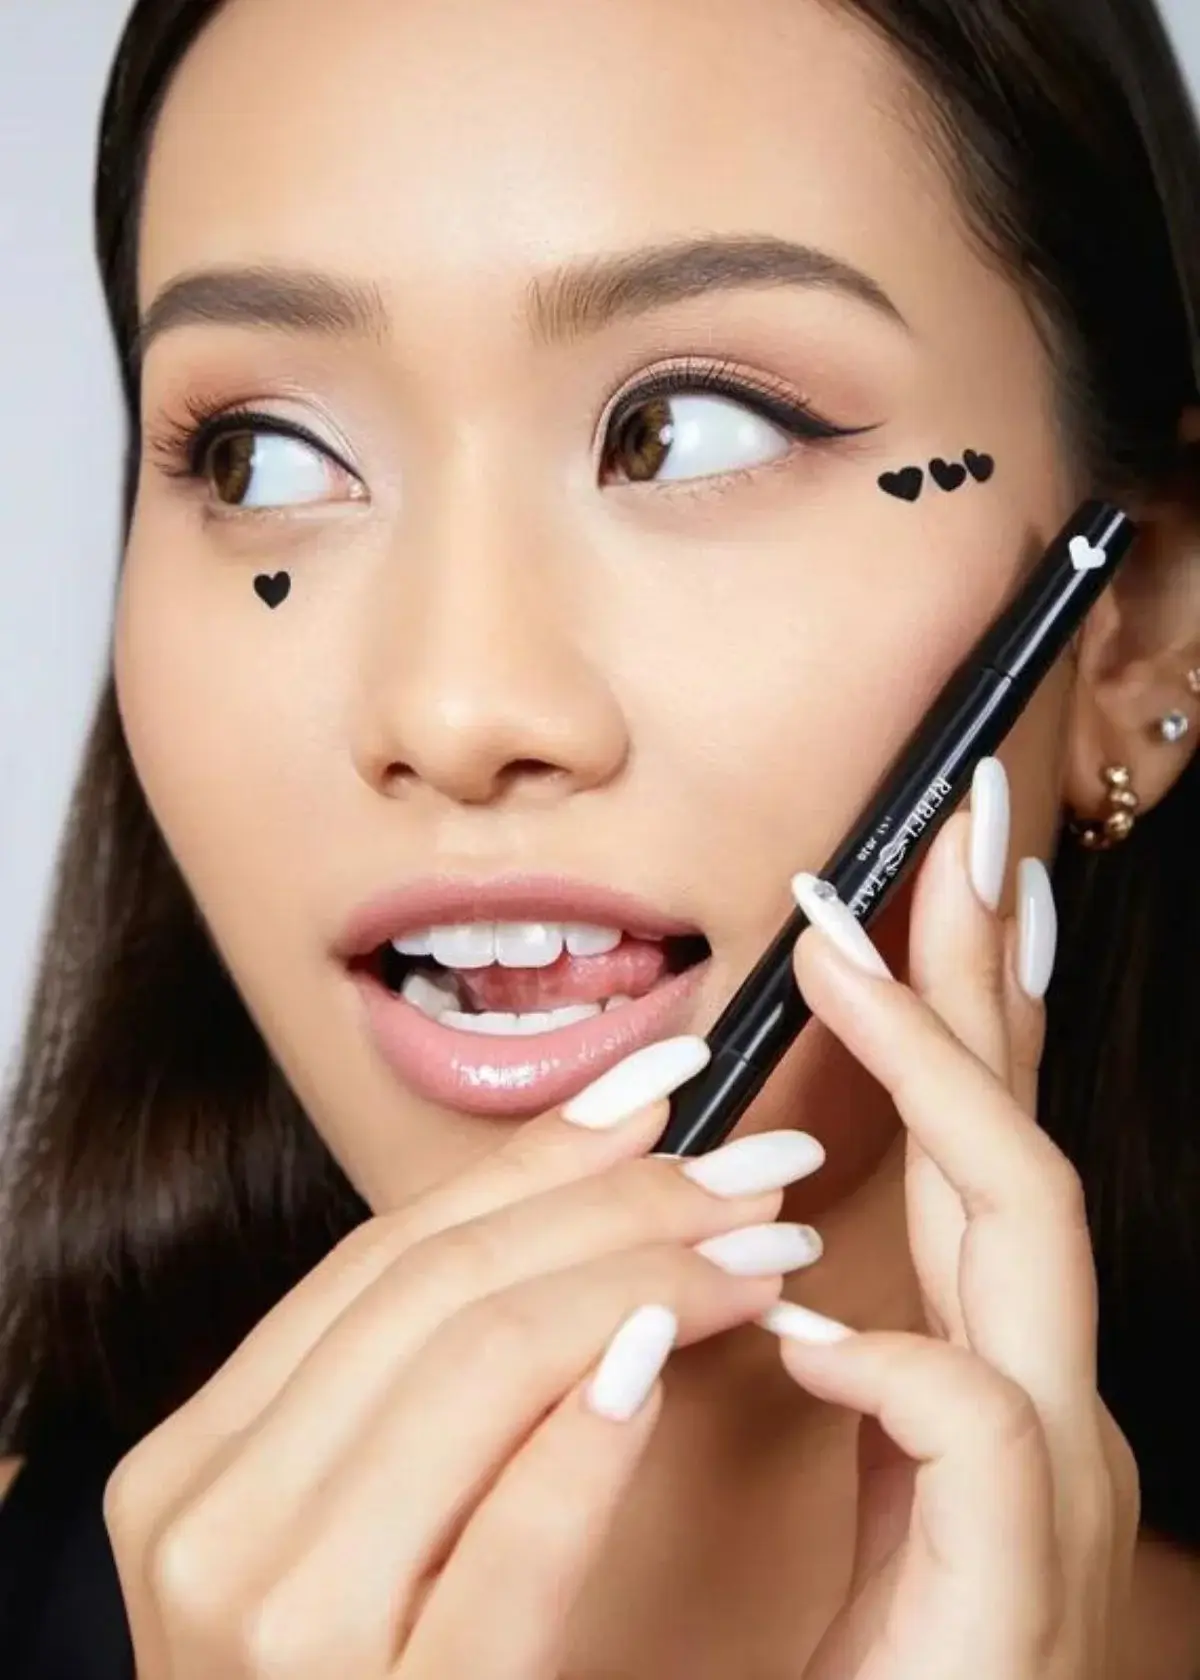 How to choose the right eyeliner stamp?